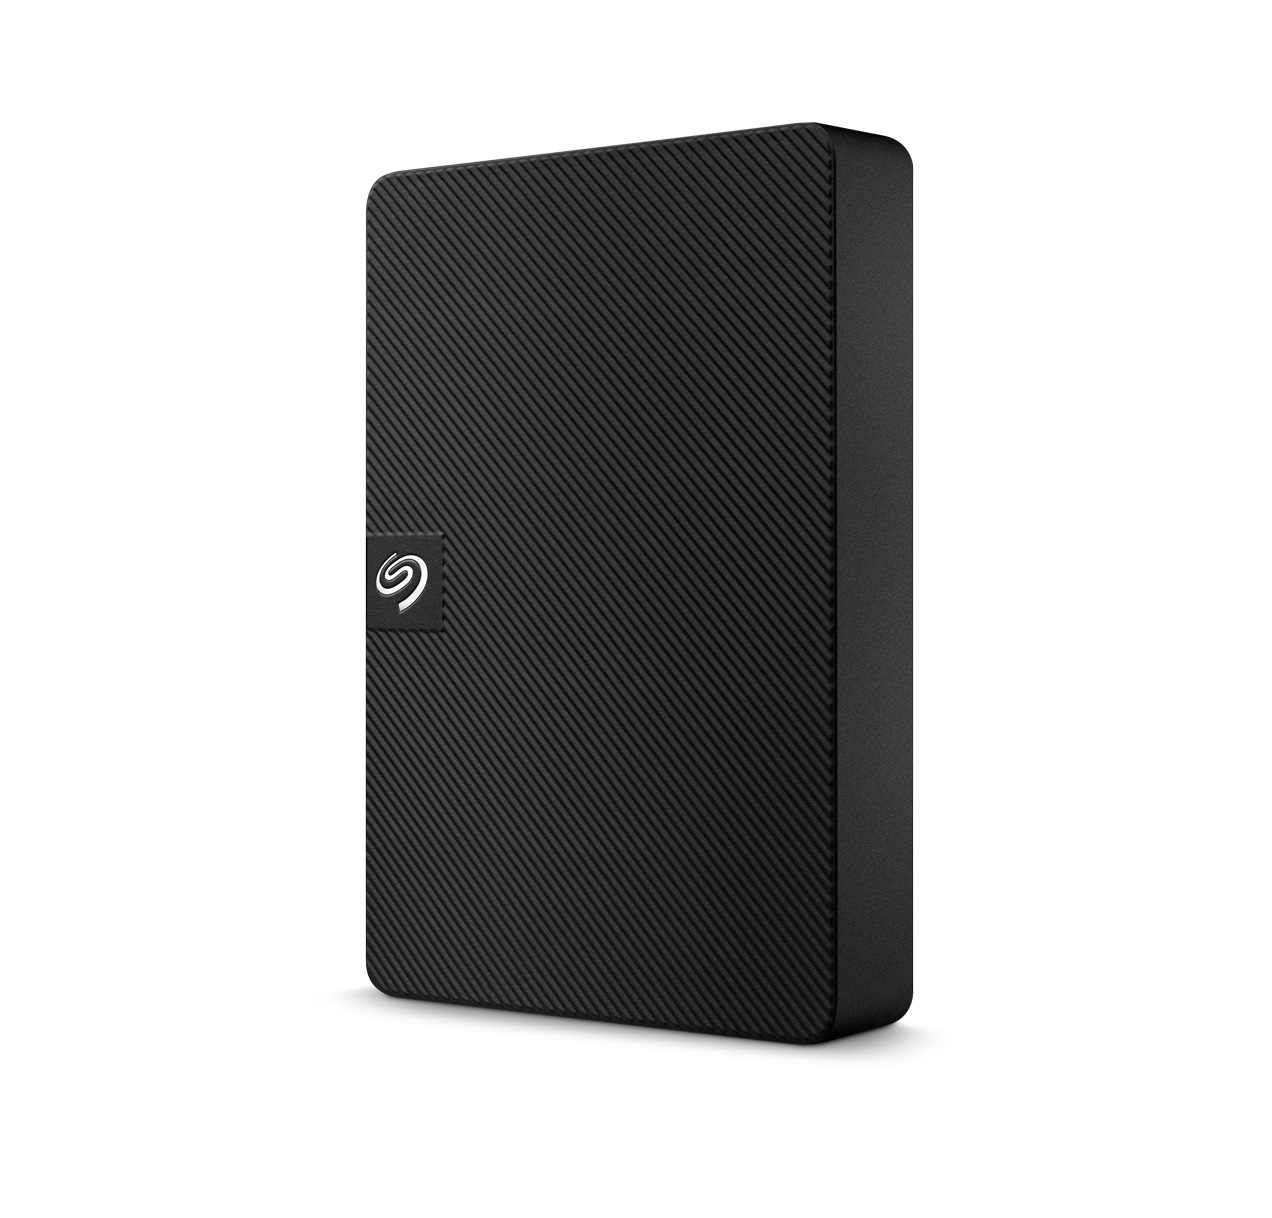 5TB Seagate Expansion Portable Drive HDD